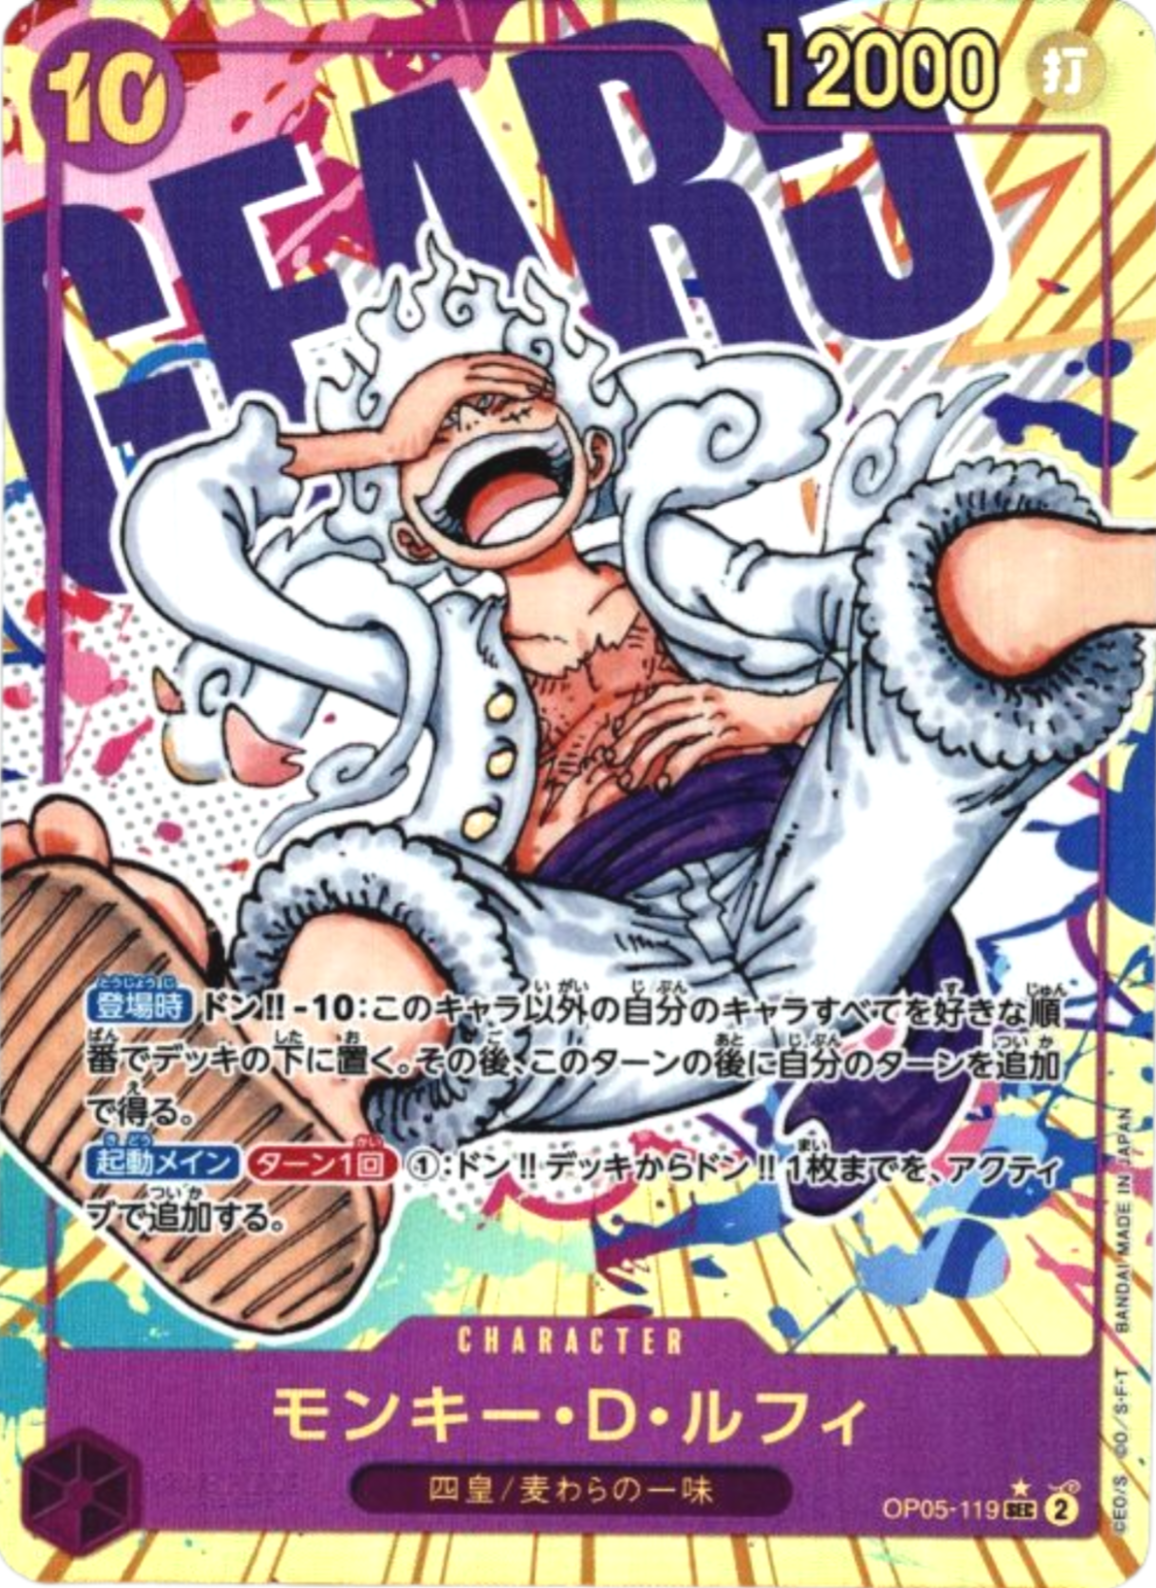 Carddass - One Piece - Promotional Card OP05-119 Monkey D. Luffy [ALTER]